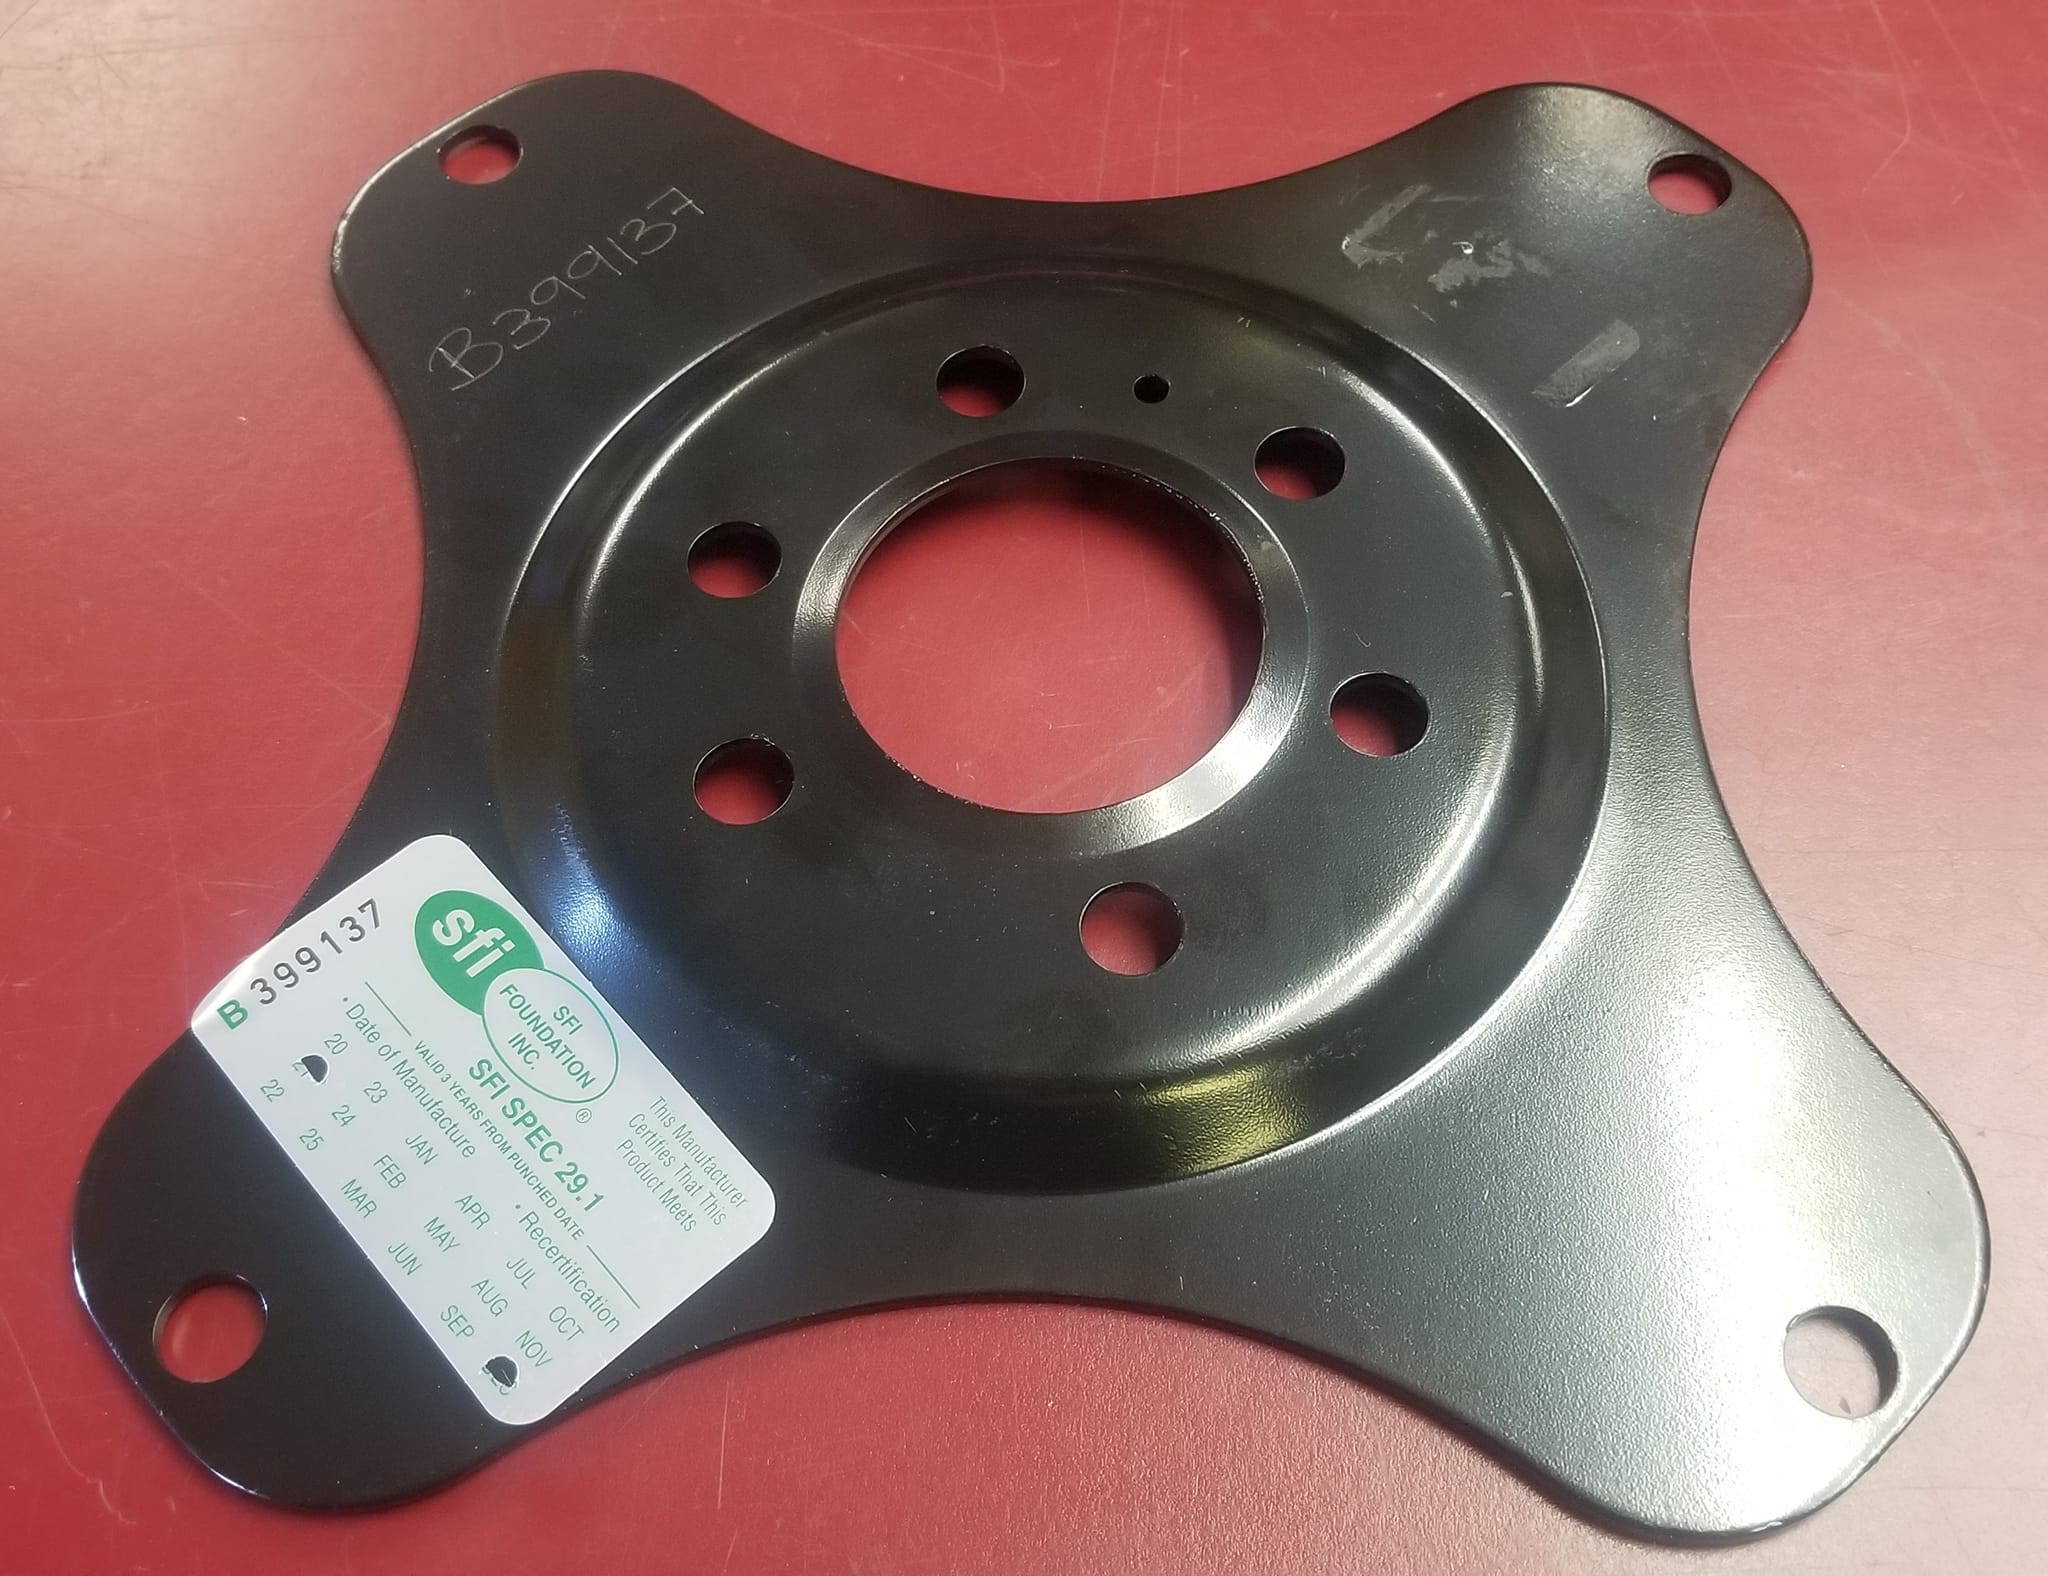 PCE226.1031 compatible with Mopar compatible with Chrysler SB 318 340 360 BB 383 440 Internal Balance Heavy Duty Flexplate 